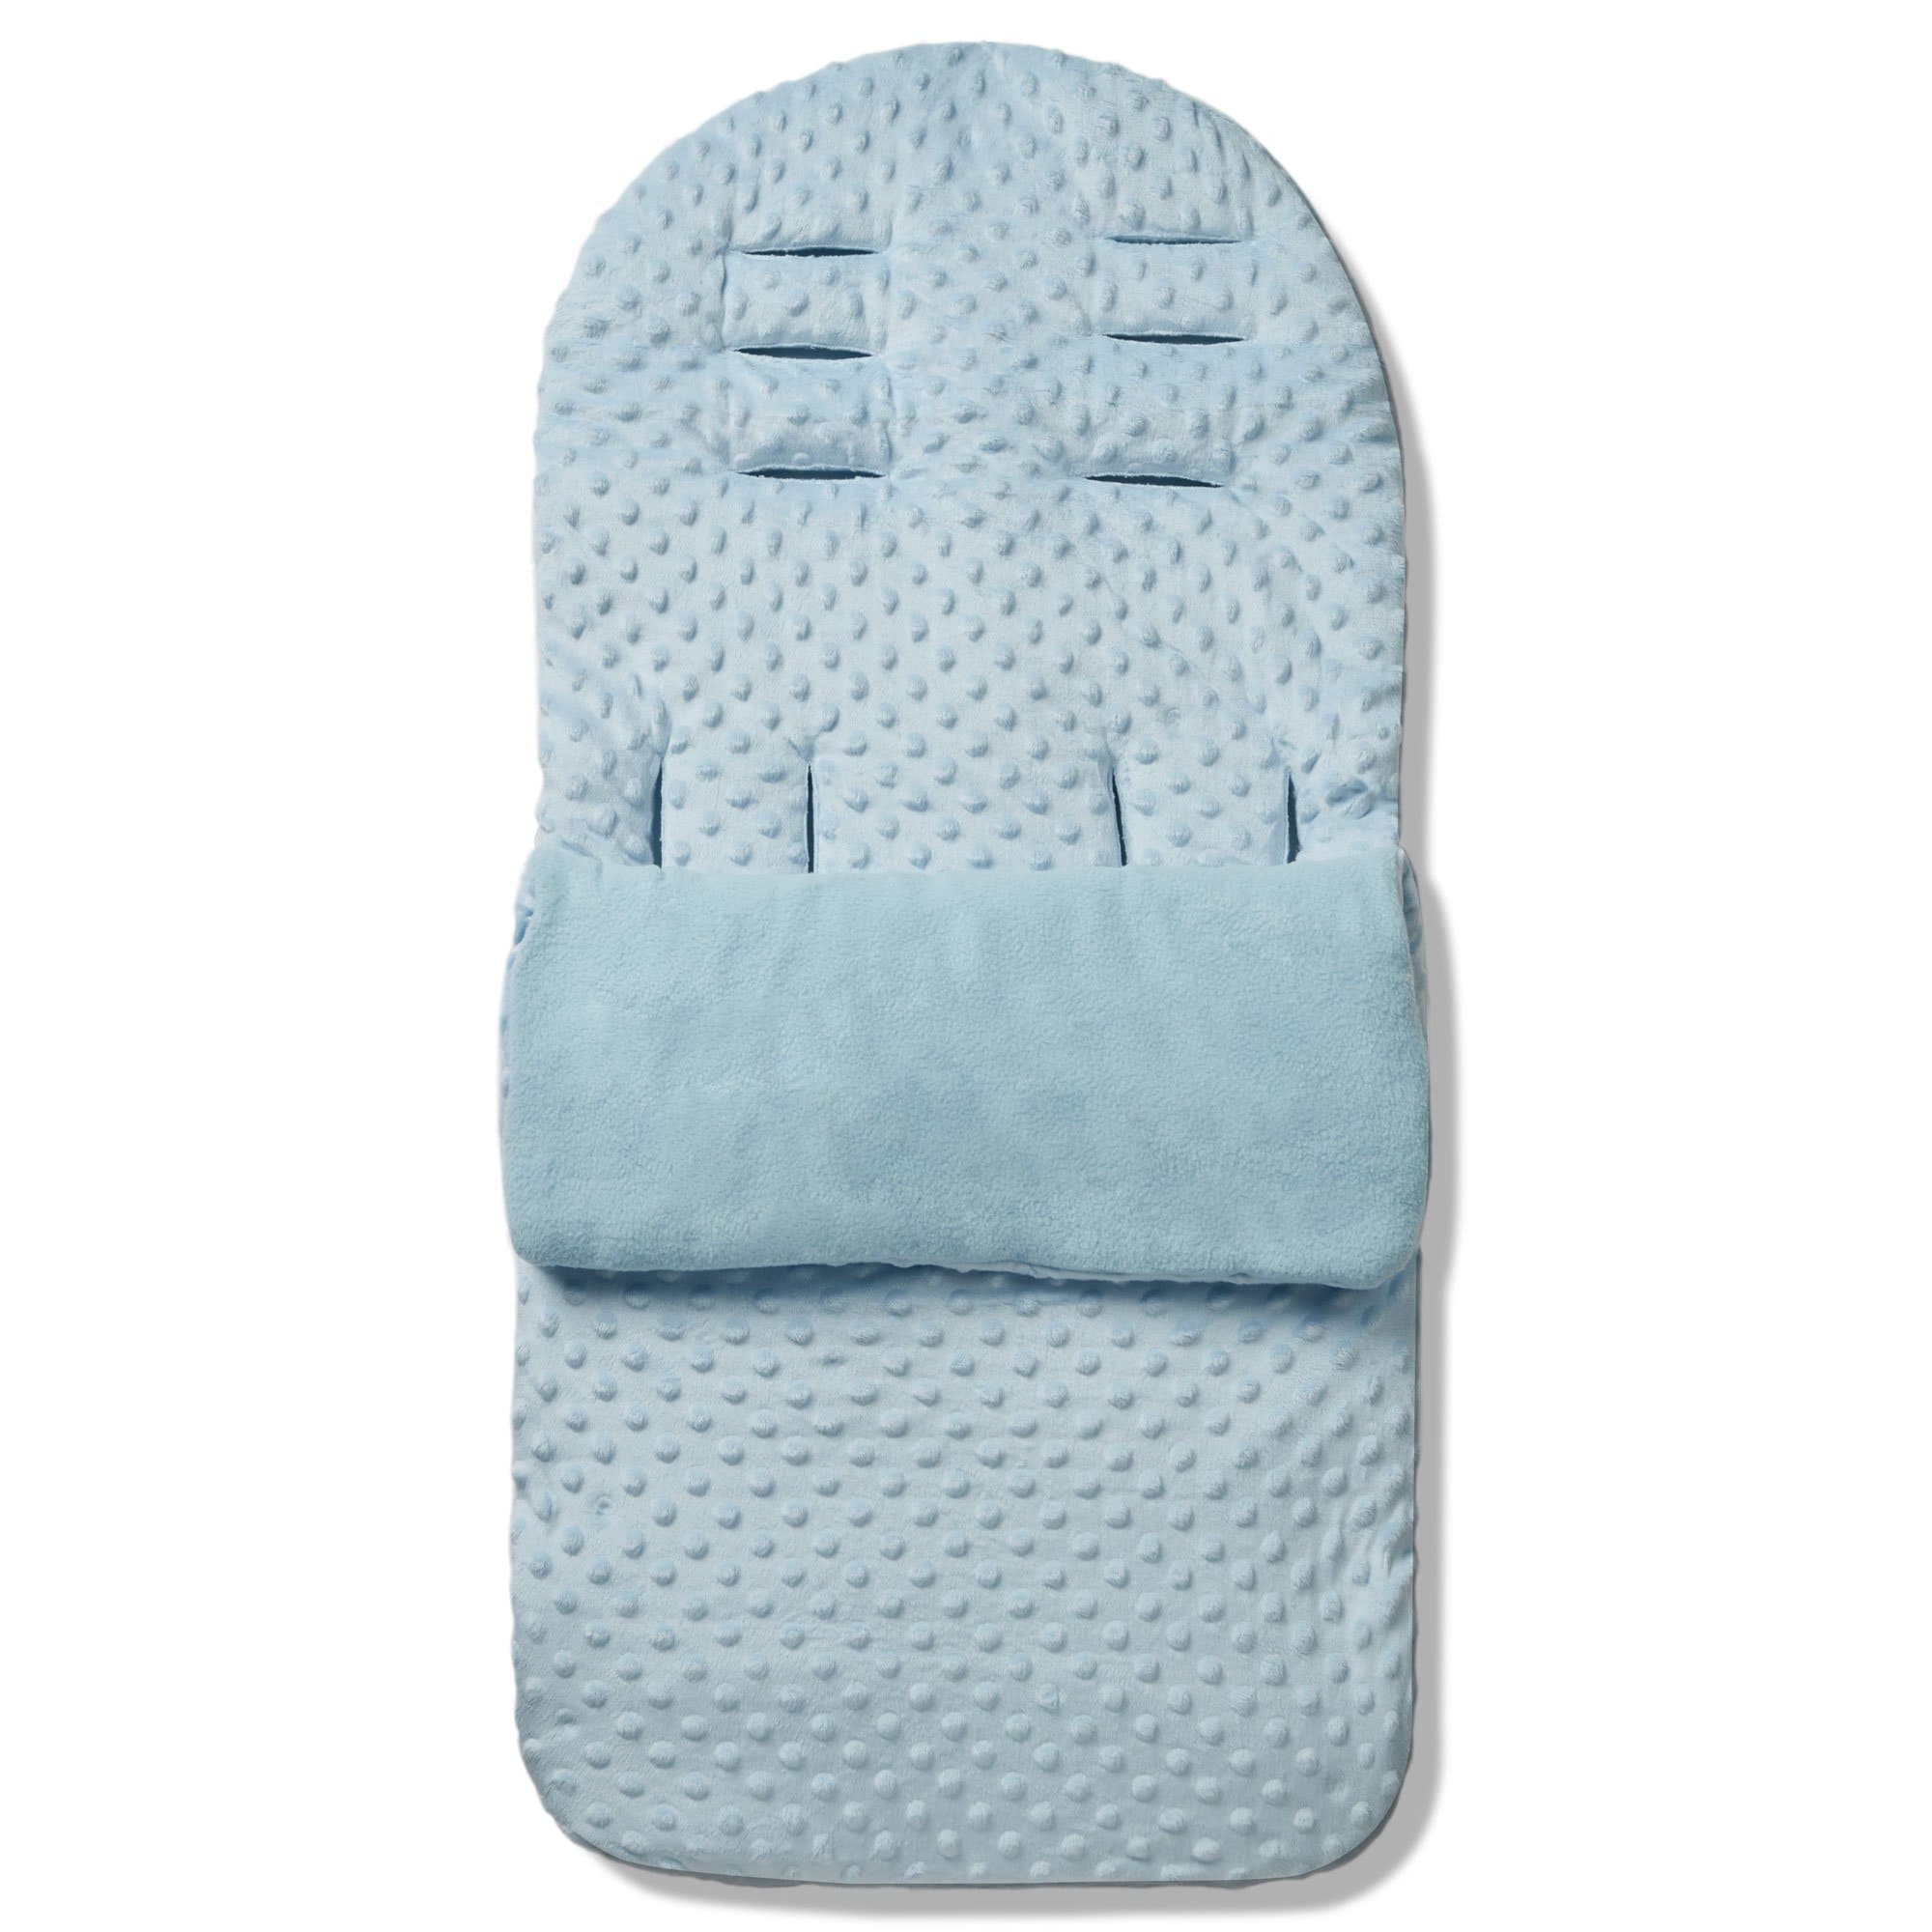 Dimple Footmuff / Cosy Toes Compatible with Red Kite - Blue / Fits All Models | For Your Little One